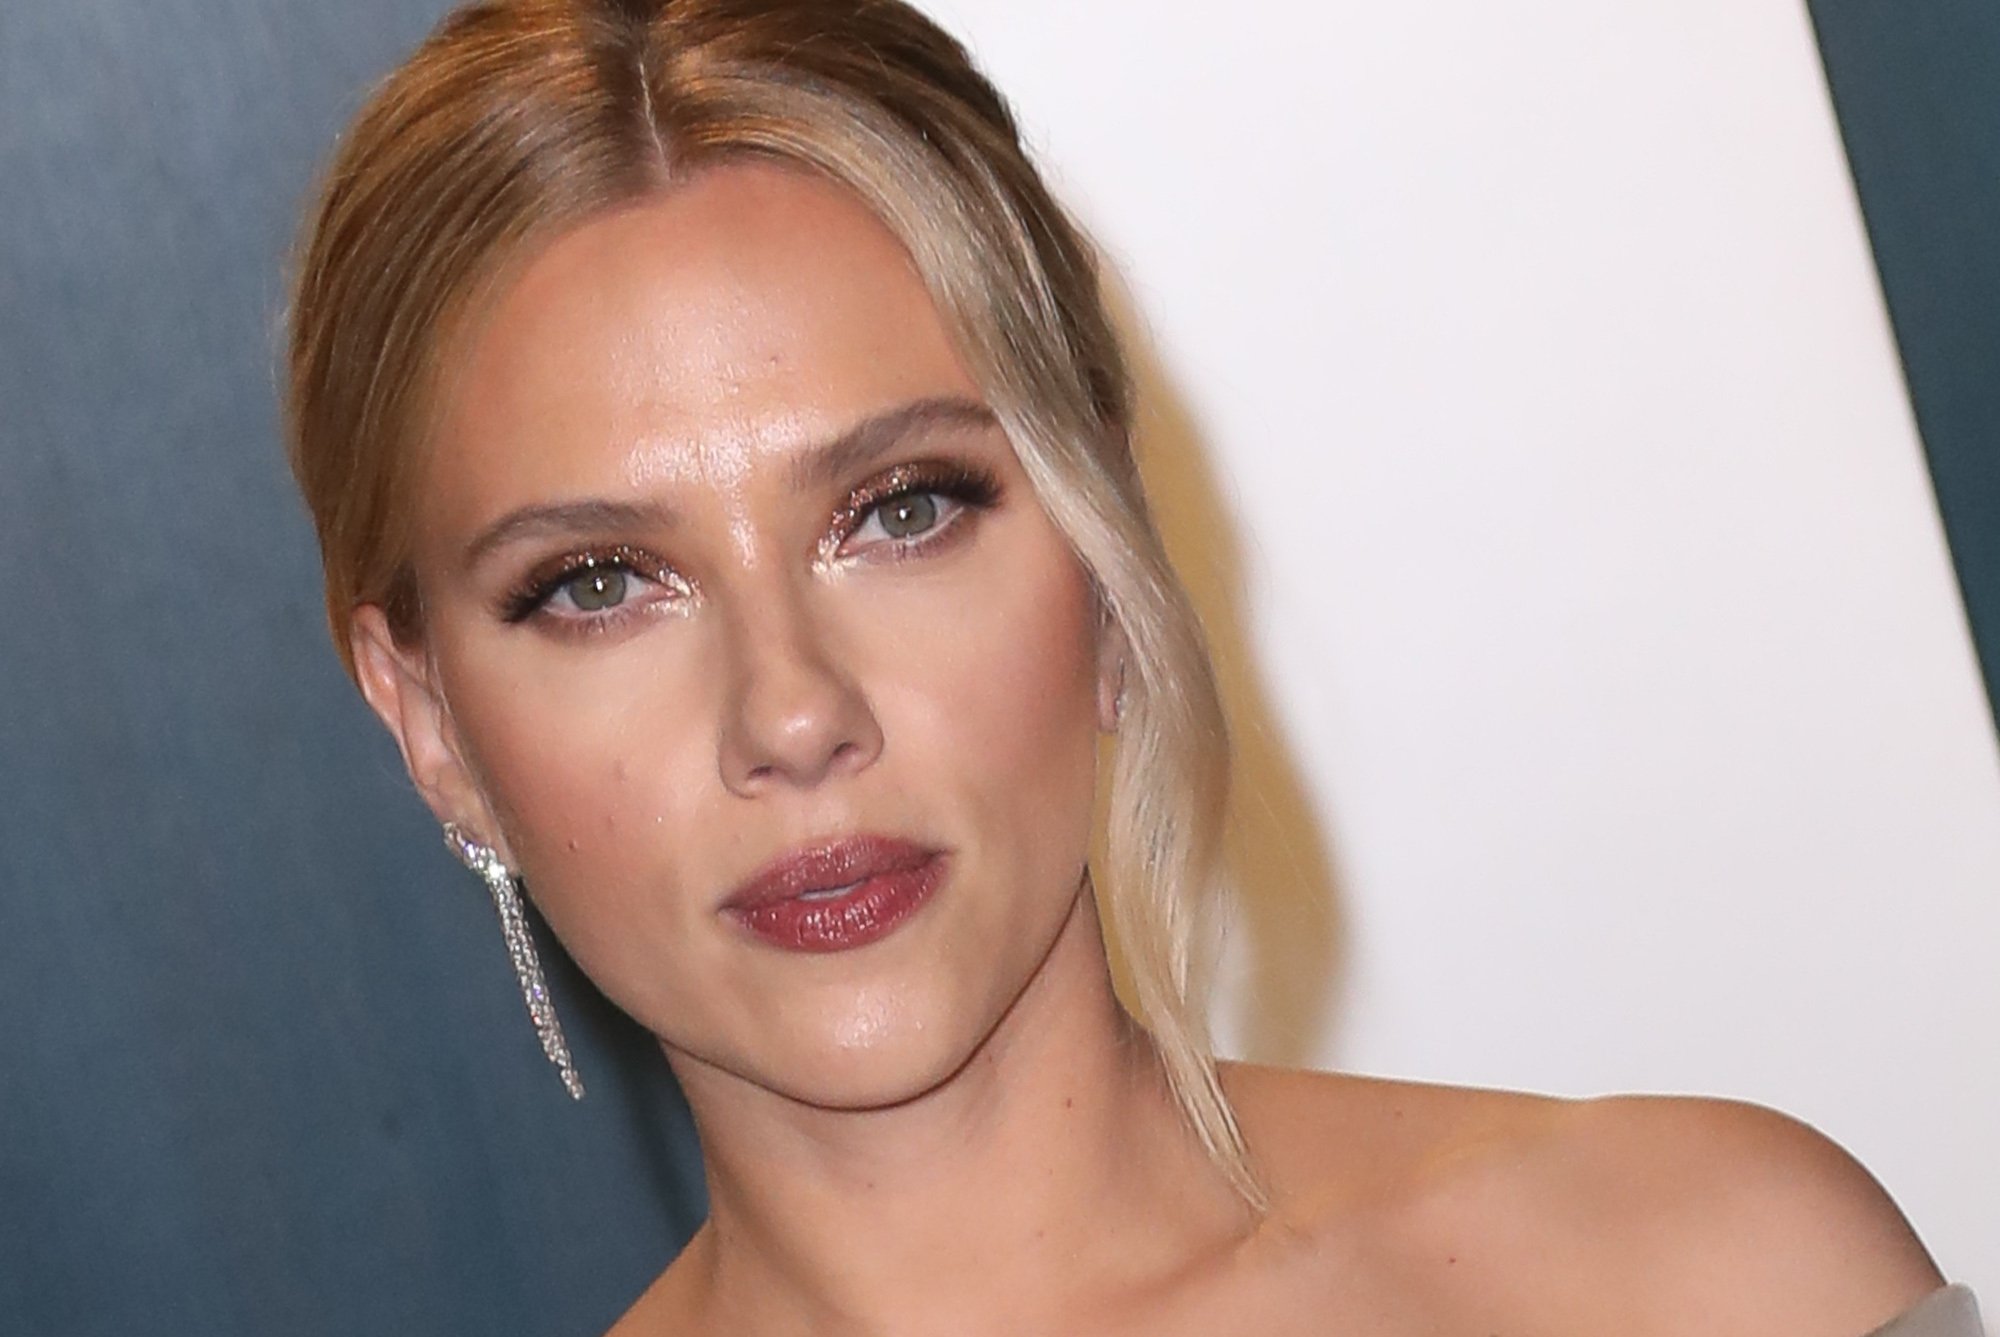 Scarlett Johansson Reached a New Level of Hotness in This Interview